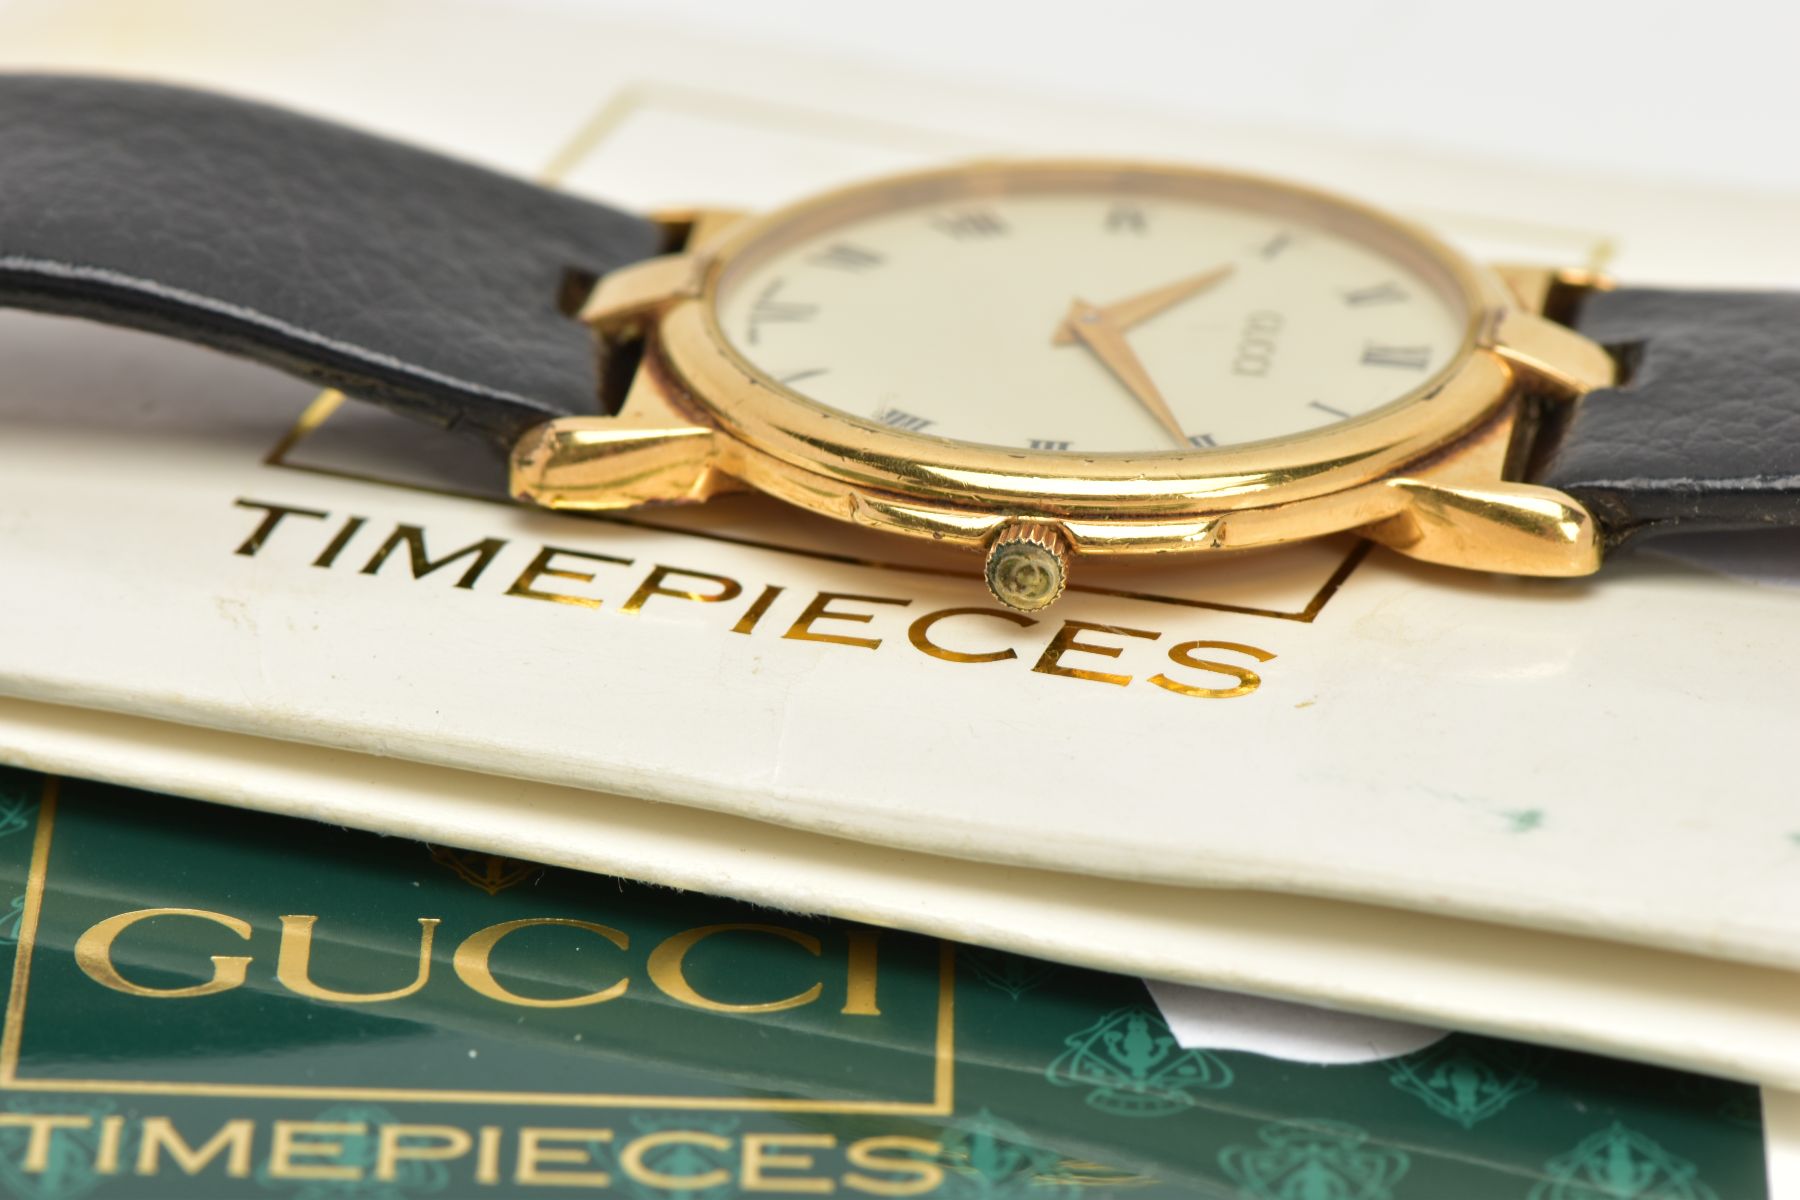 A GENTS 'GUCCI' WRISTWATCH, round cream dial signed 'Gucci', Roman numerals, gold tone hands, within - Image 5 of 5